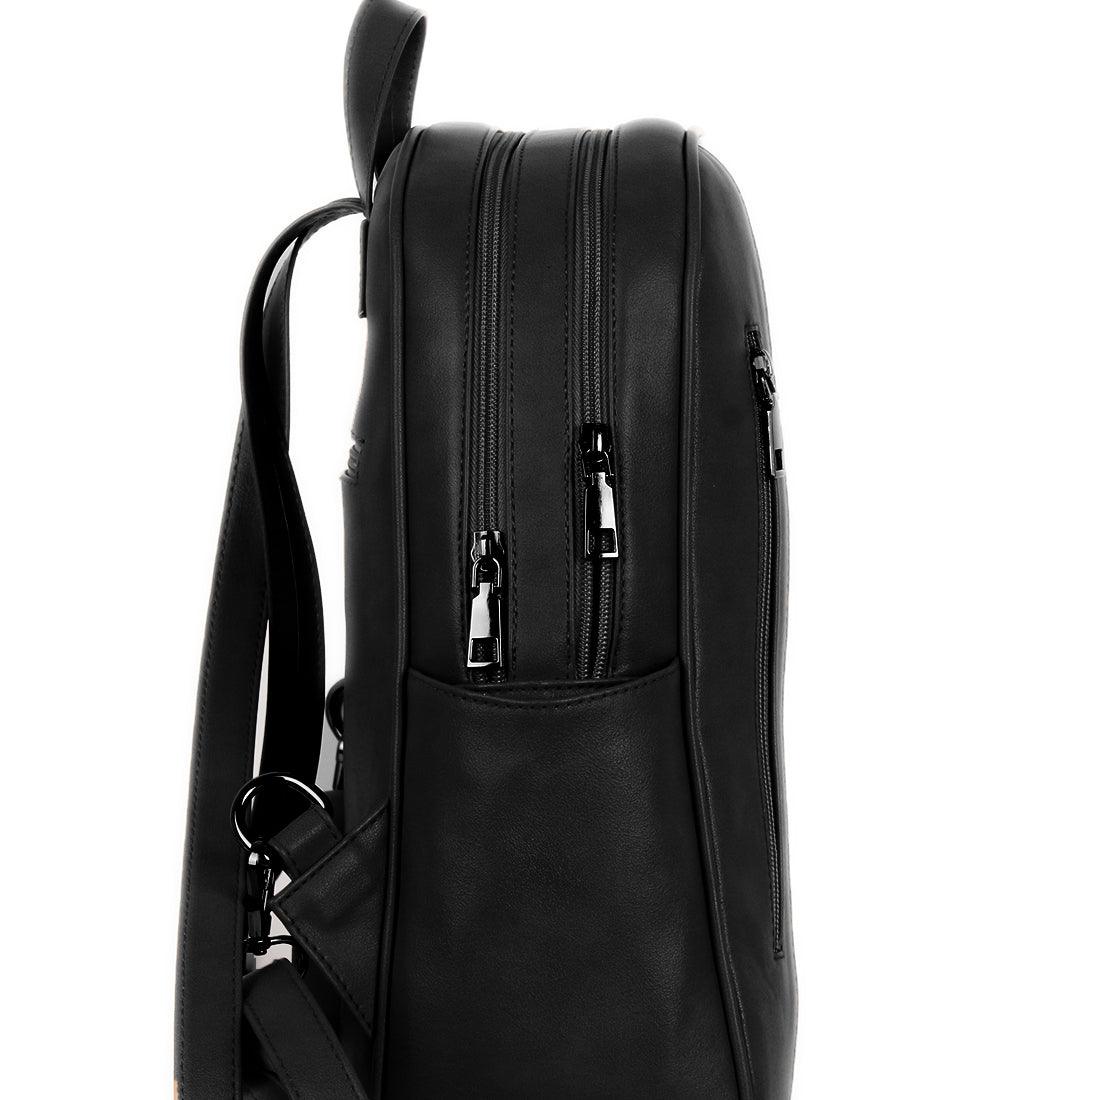 BLACK MIXED BACKPACK FLY WITH ME - CANVAEGYPT